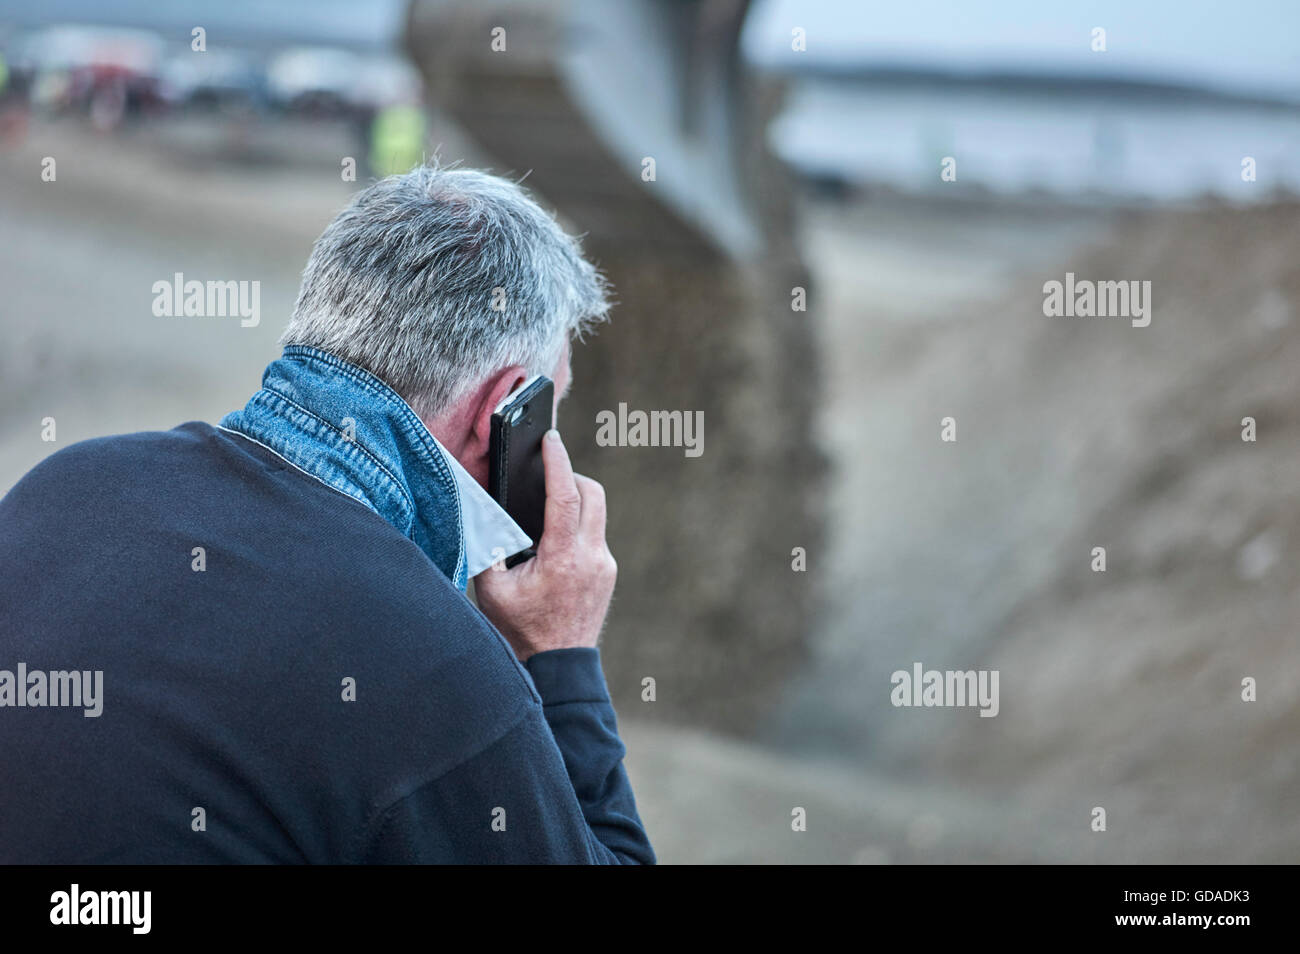 Grey haired man on mobile phone with blurred background Stock Photo